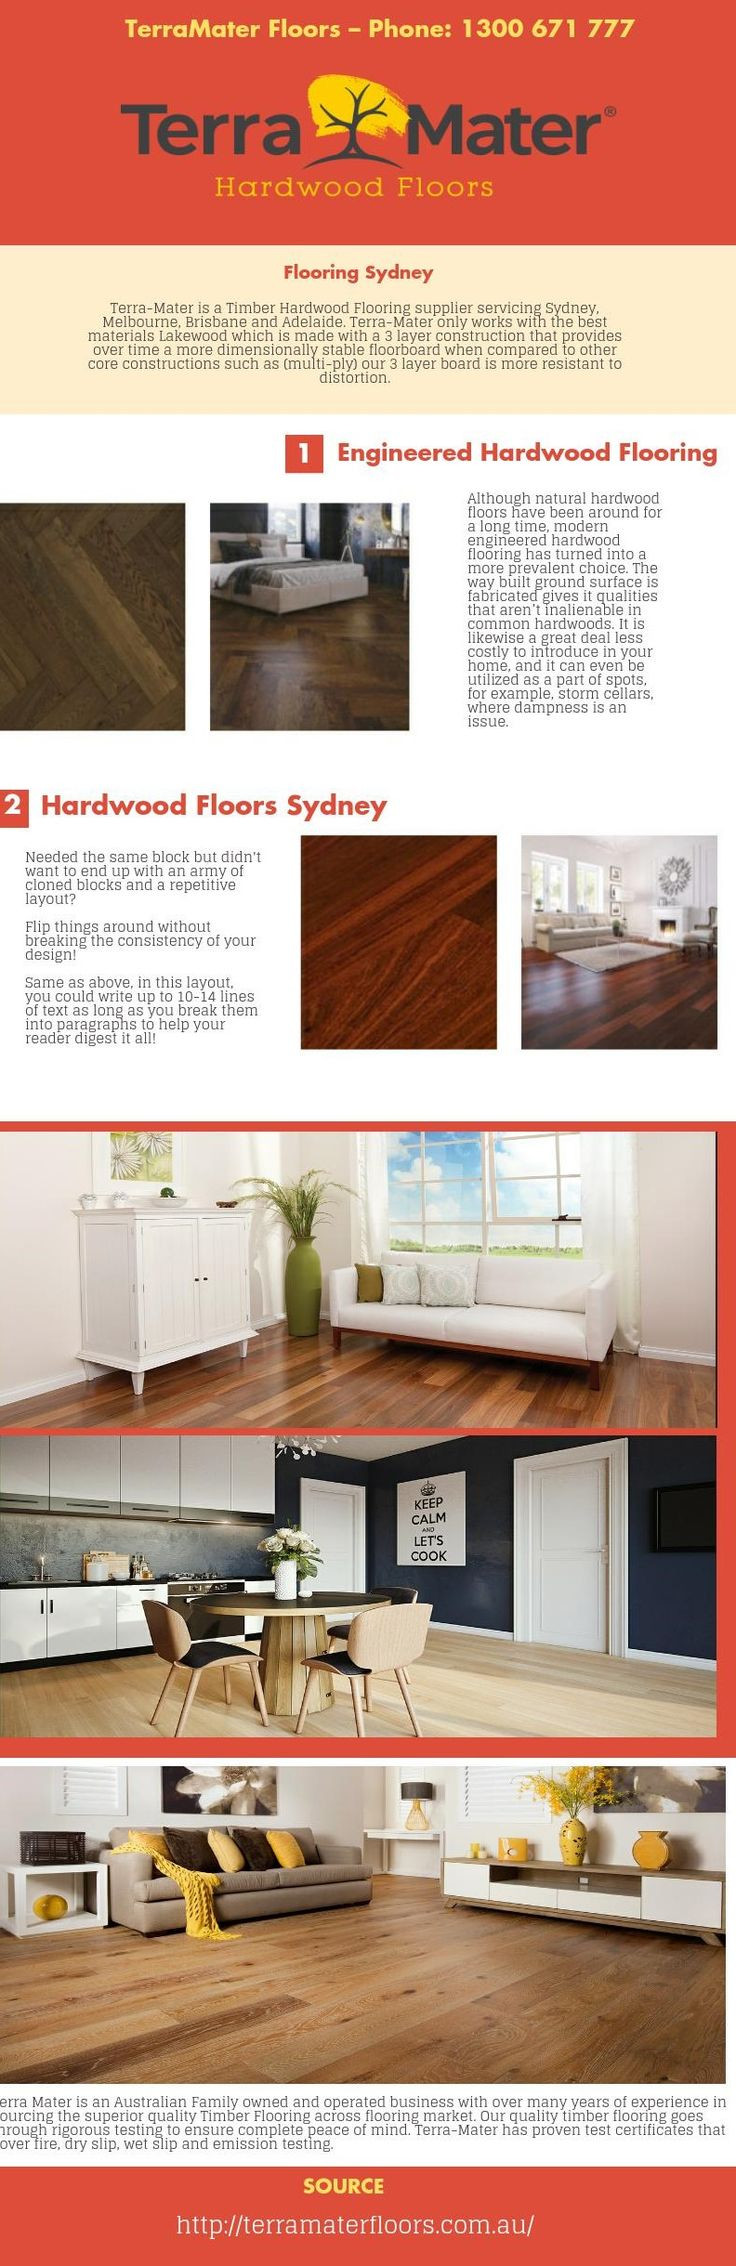 20 Nice Hardwood Flooring Salem oregon 2024 free download hardwood flooring salem oregon of 33 best terramaterfloors images on pinterest sydney 20 years and for terra mater is an australian family owned and operated business with over many years of